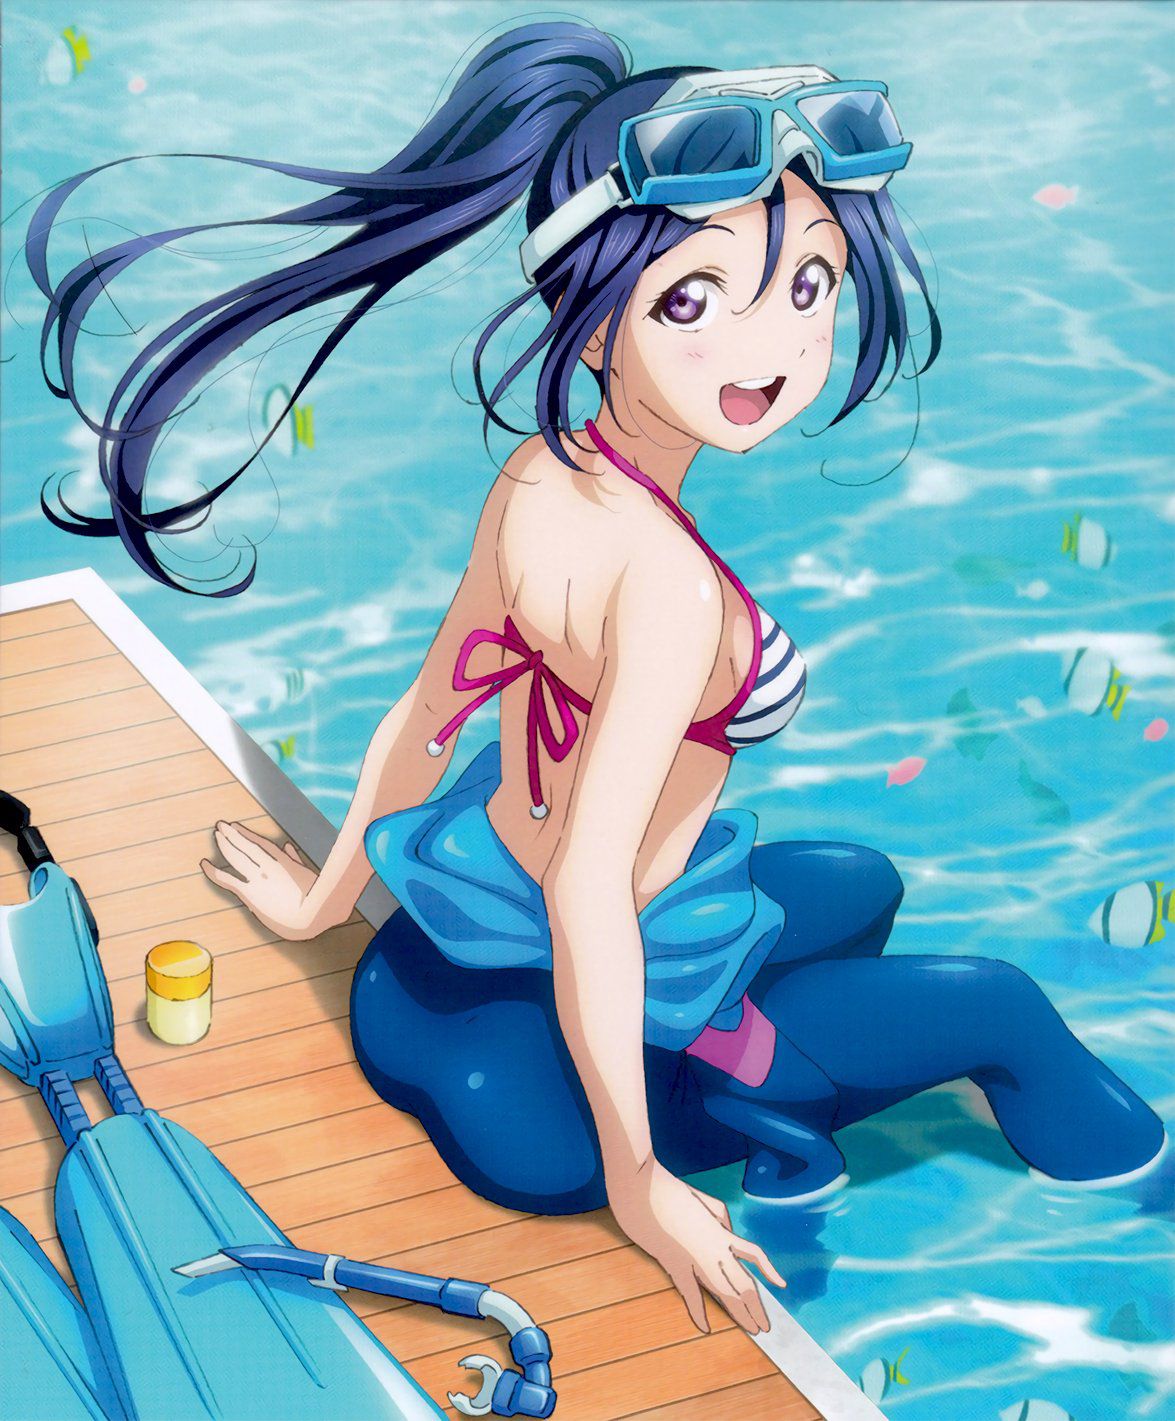 【With images】 The most erotic and syco character in the love live series wwwwwww 12